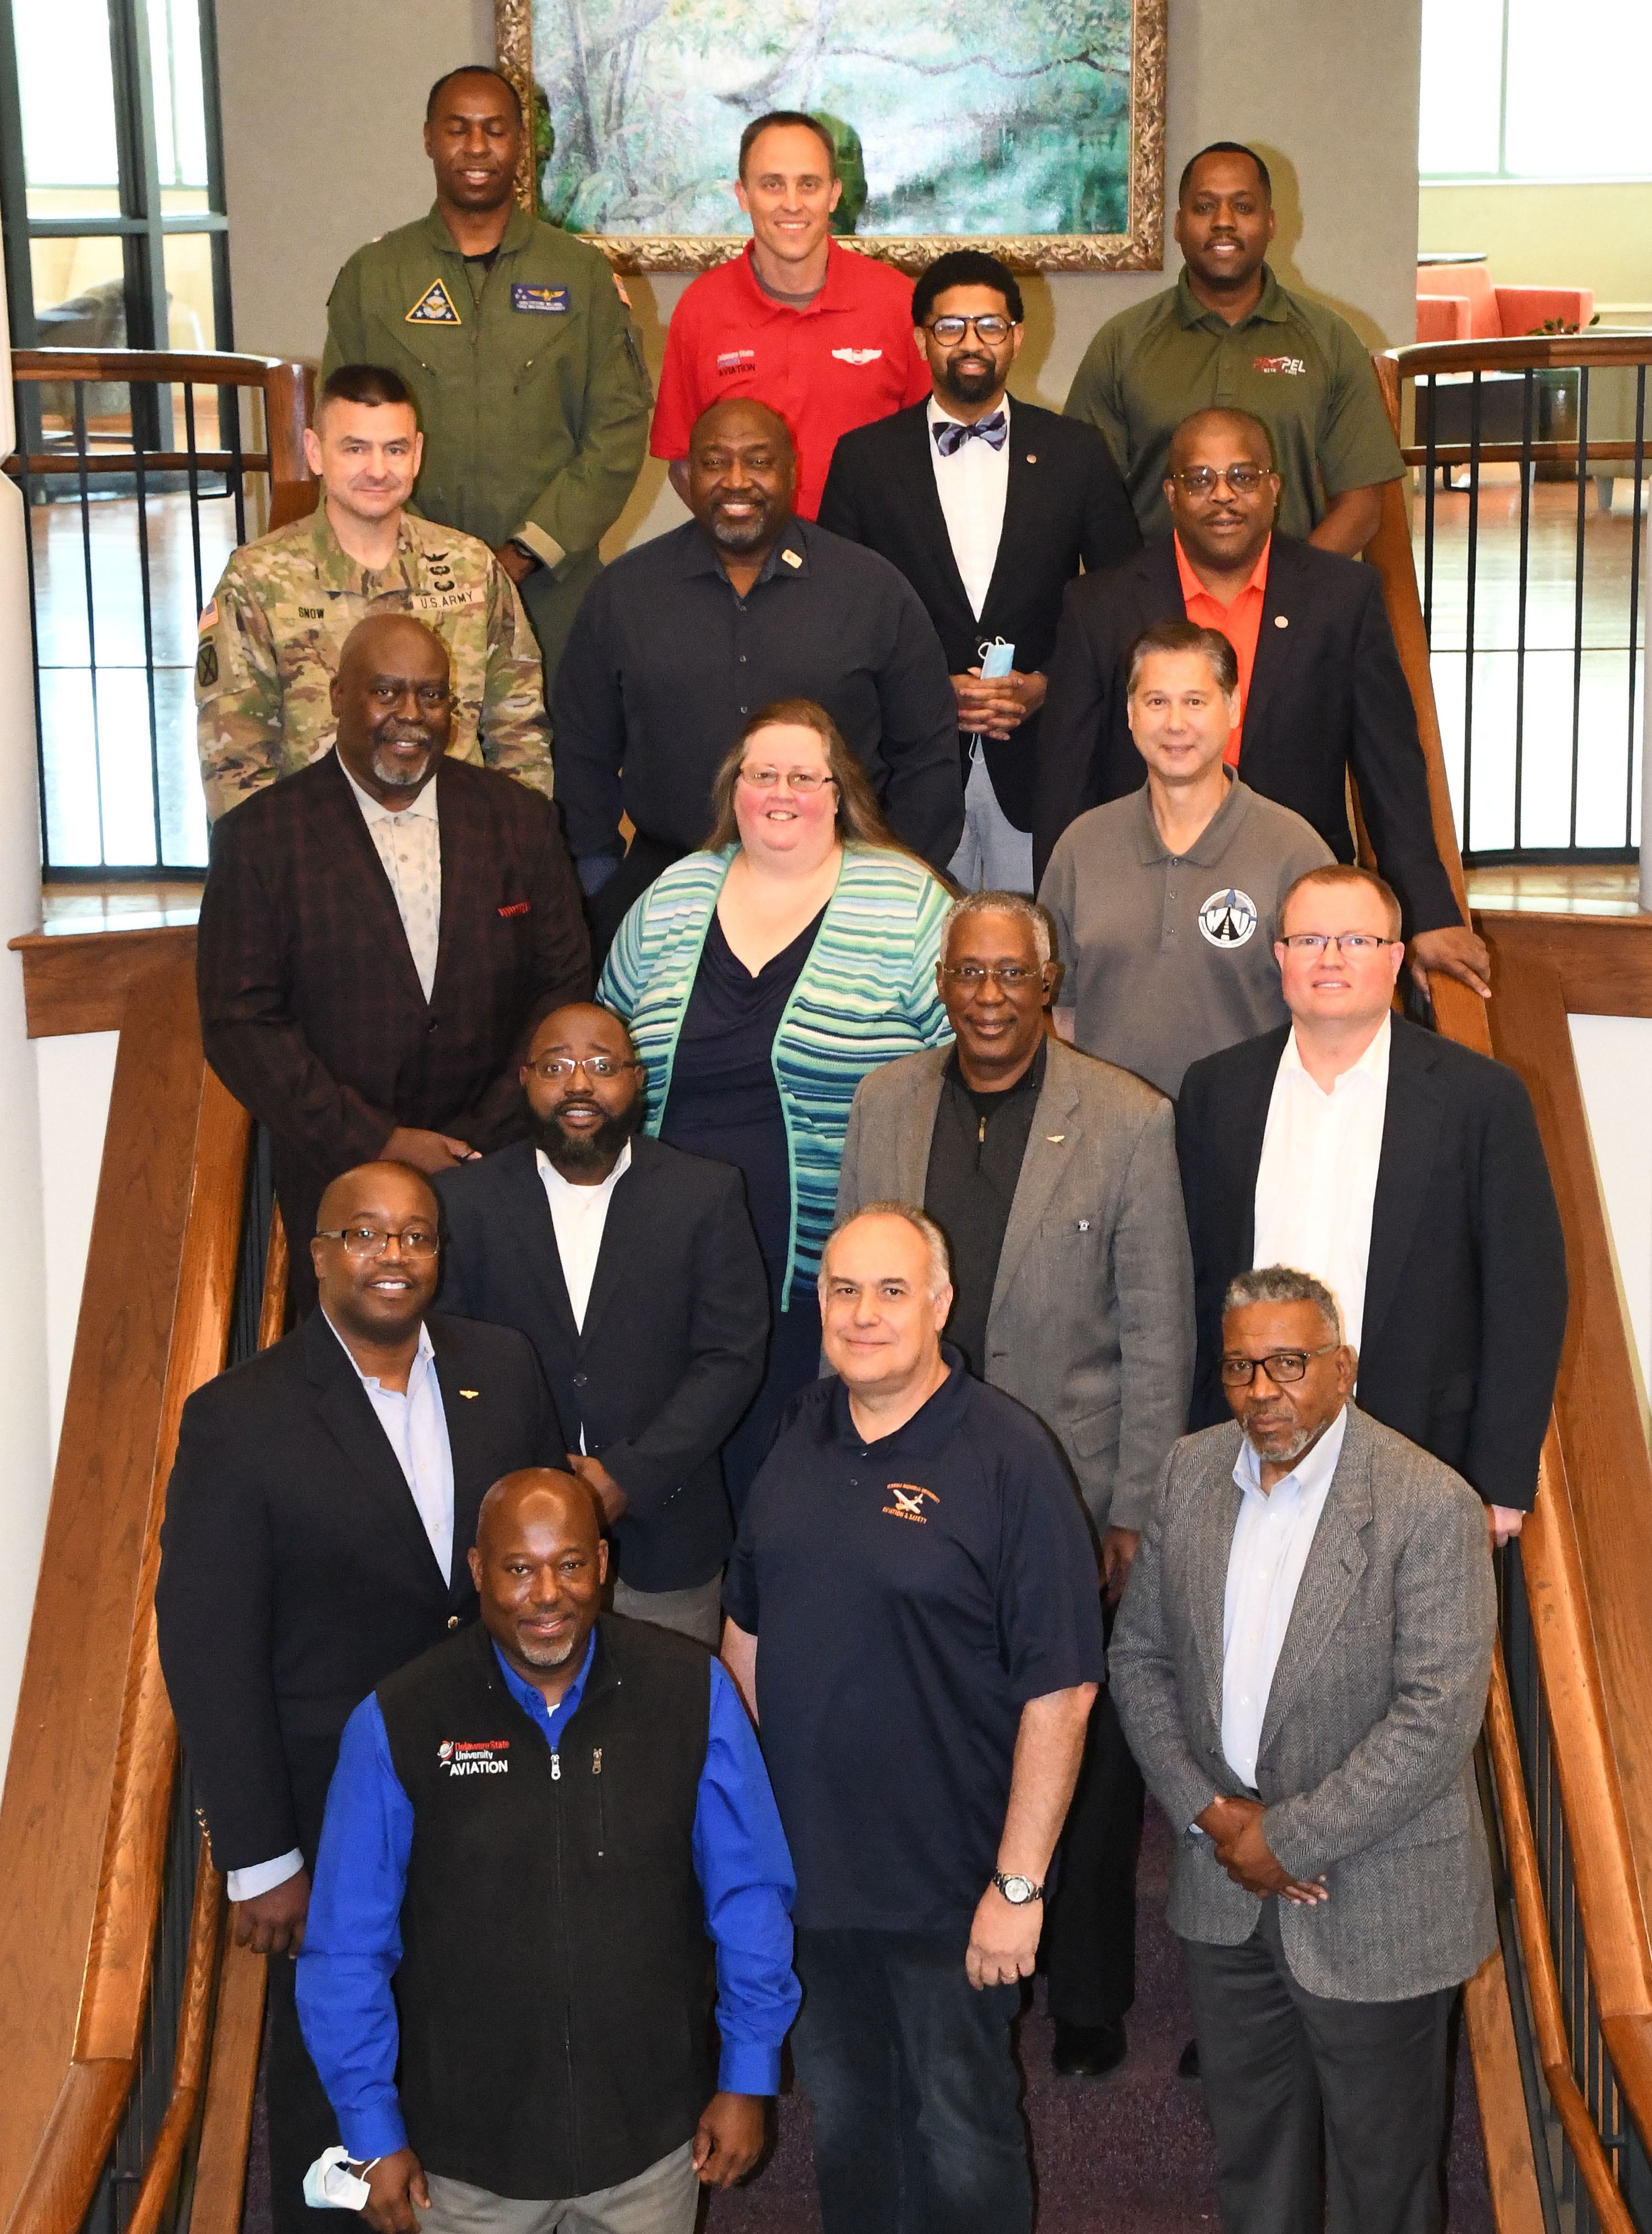 In addition to HBCU aviation directors, the summit was also attended by representatives of airlines and the military.